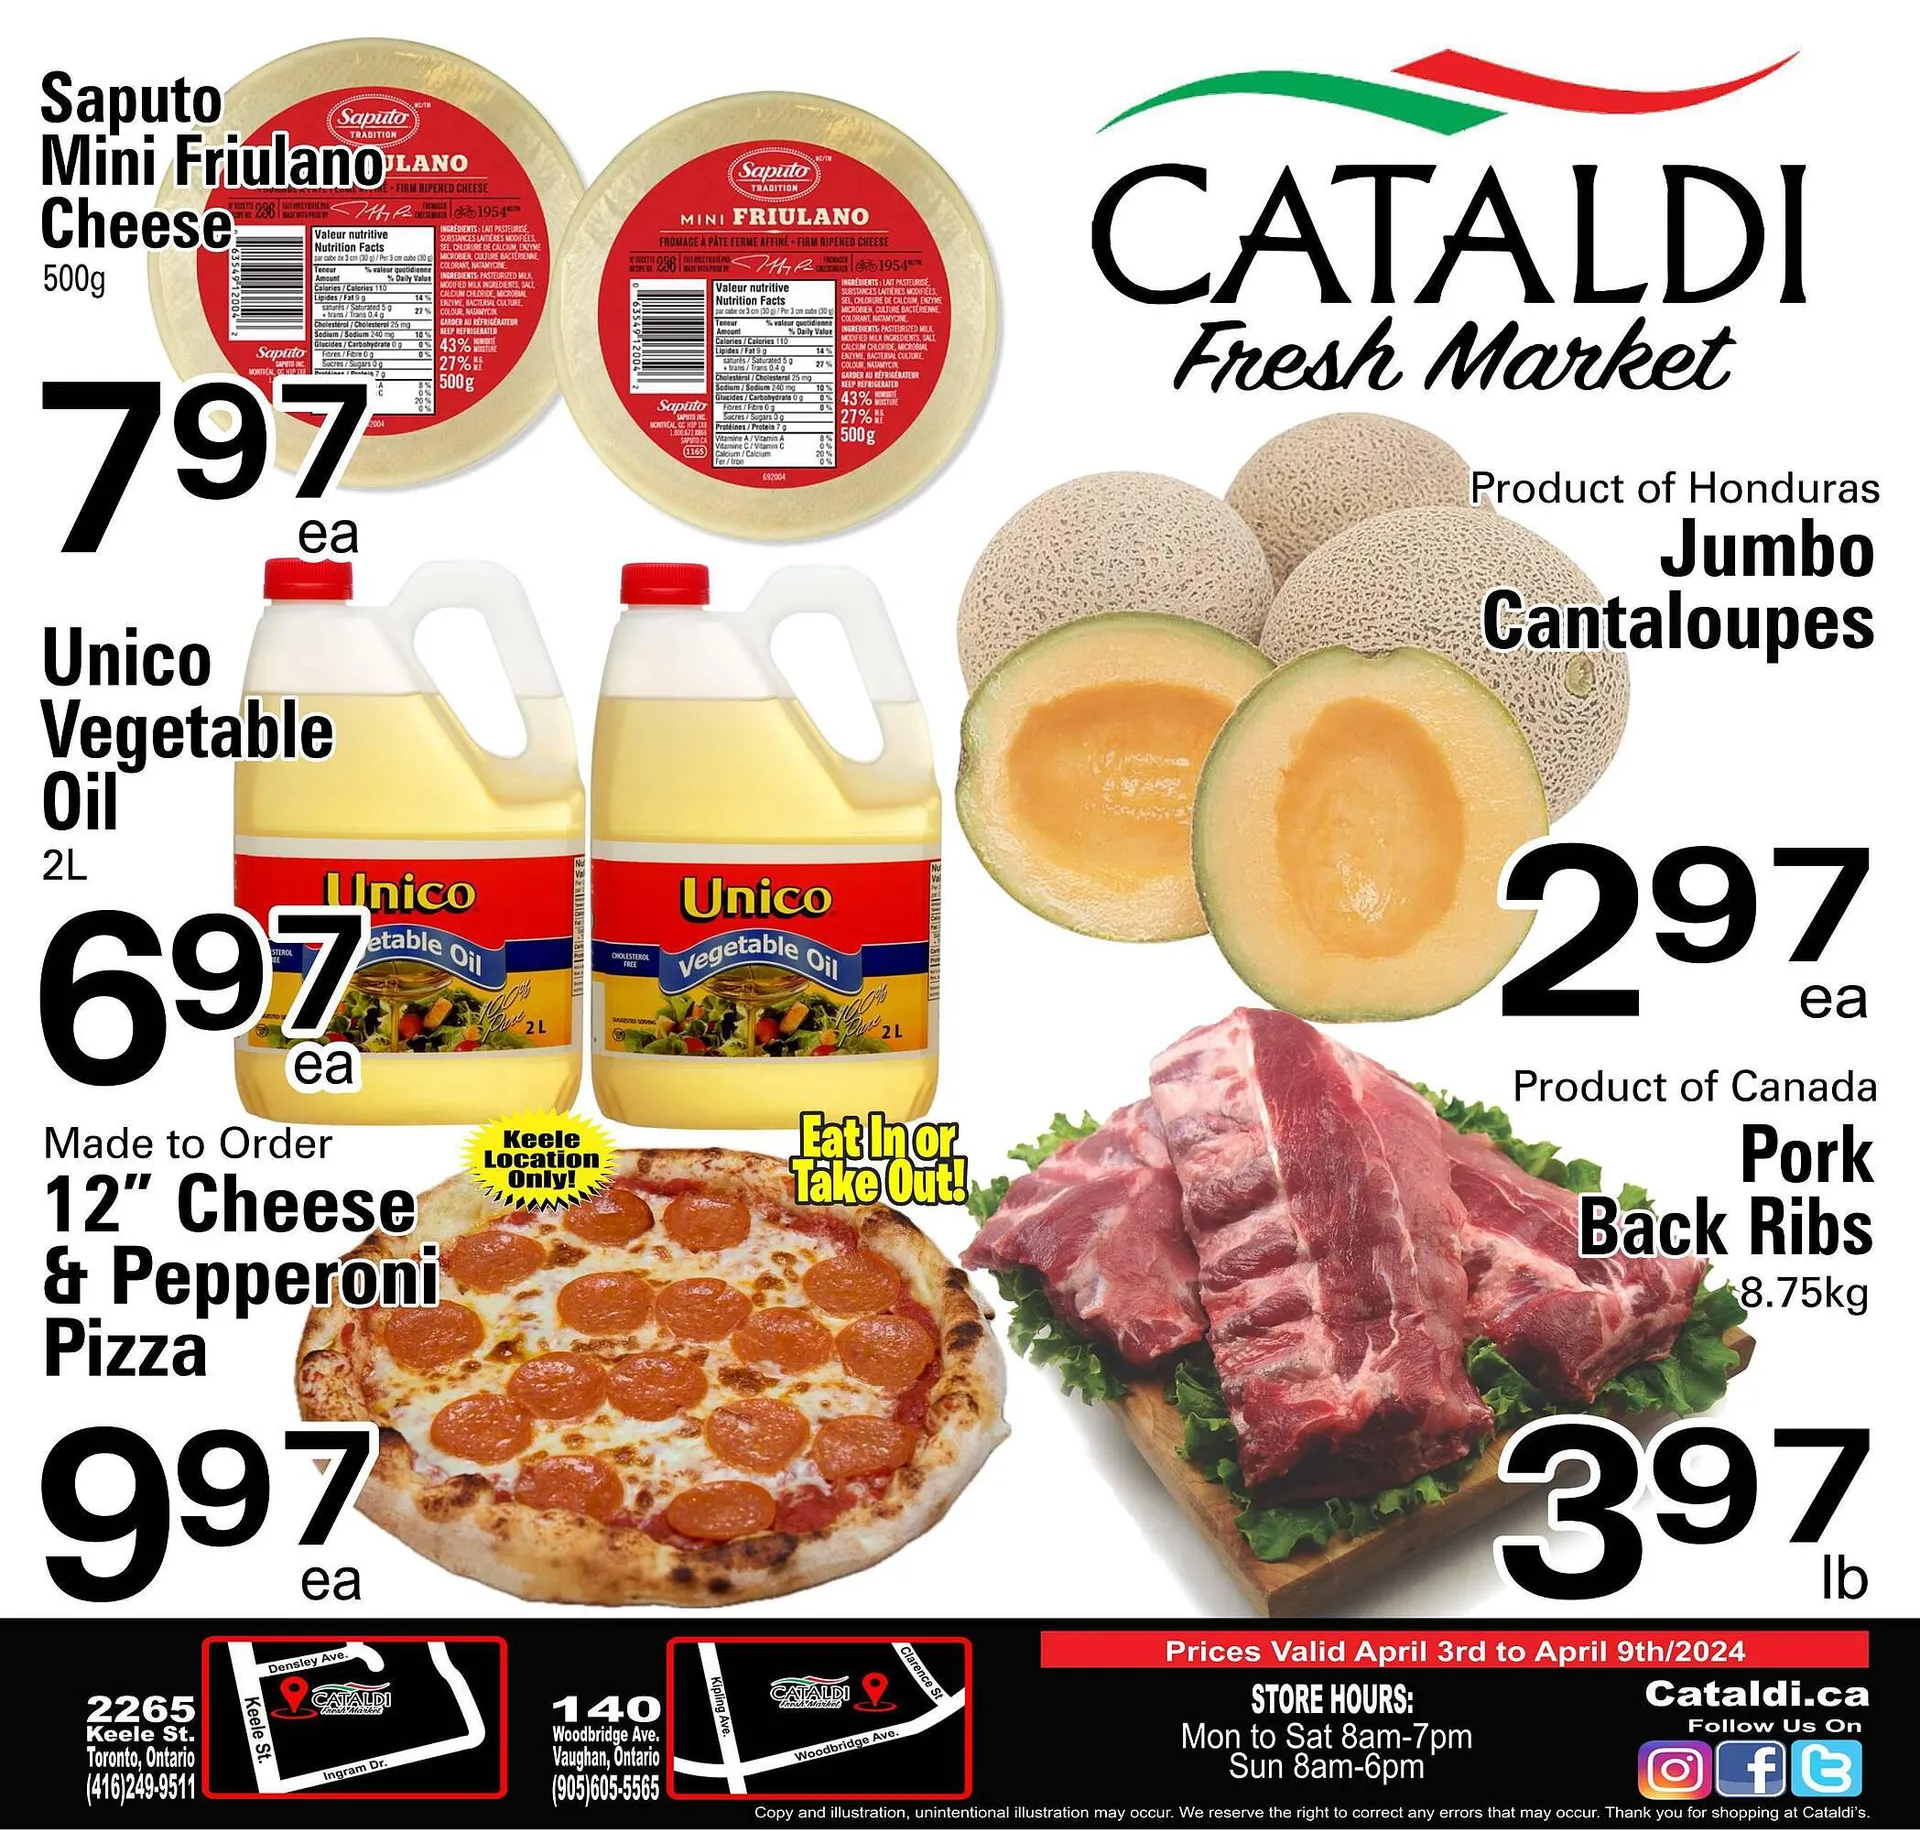 Cataldi Fresh Market flyer from April 3 to April 9 2024 - flyer page 